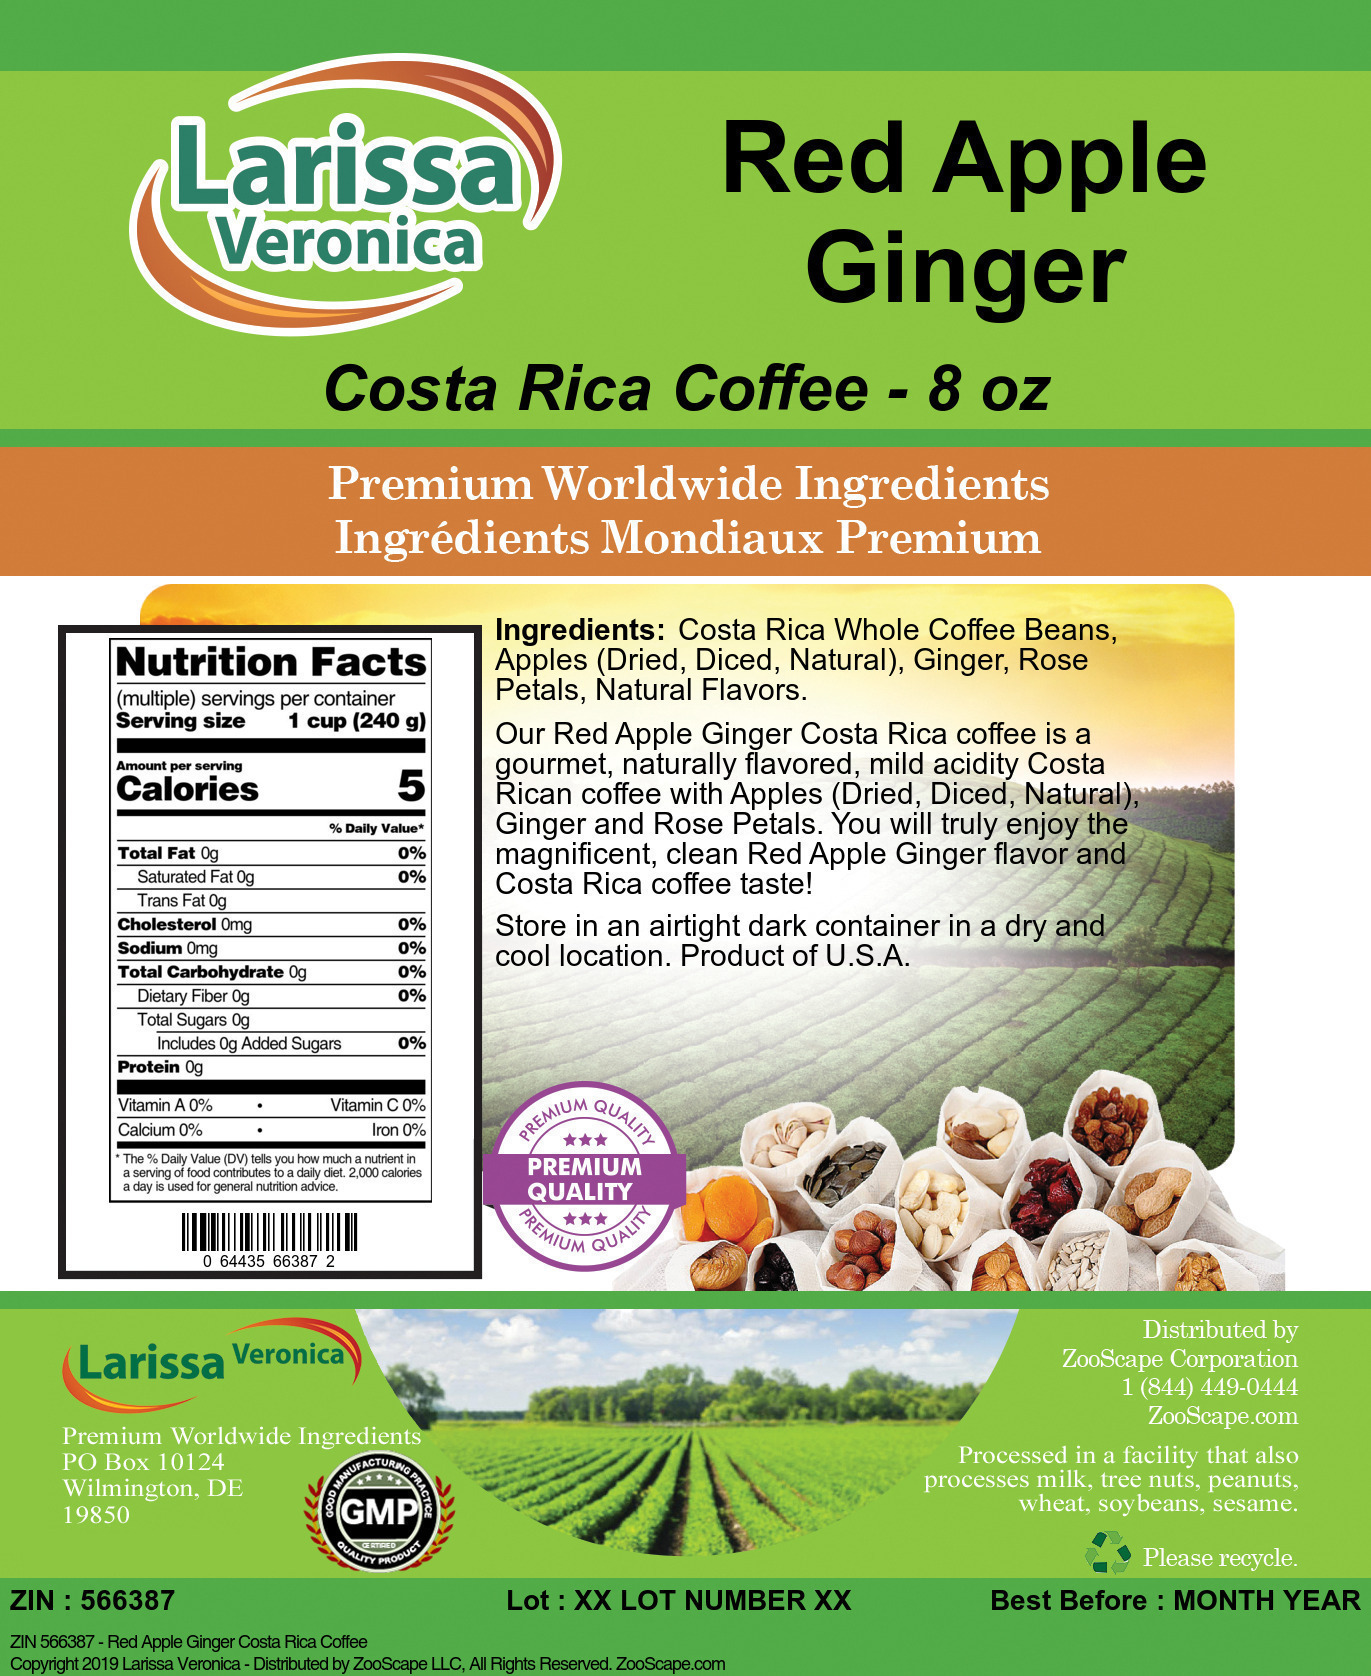 Red Apple Ginger Costa Rica Coffee - Label